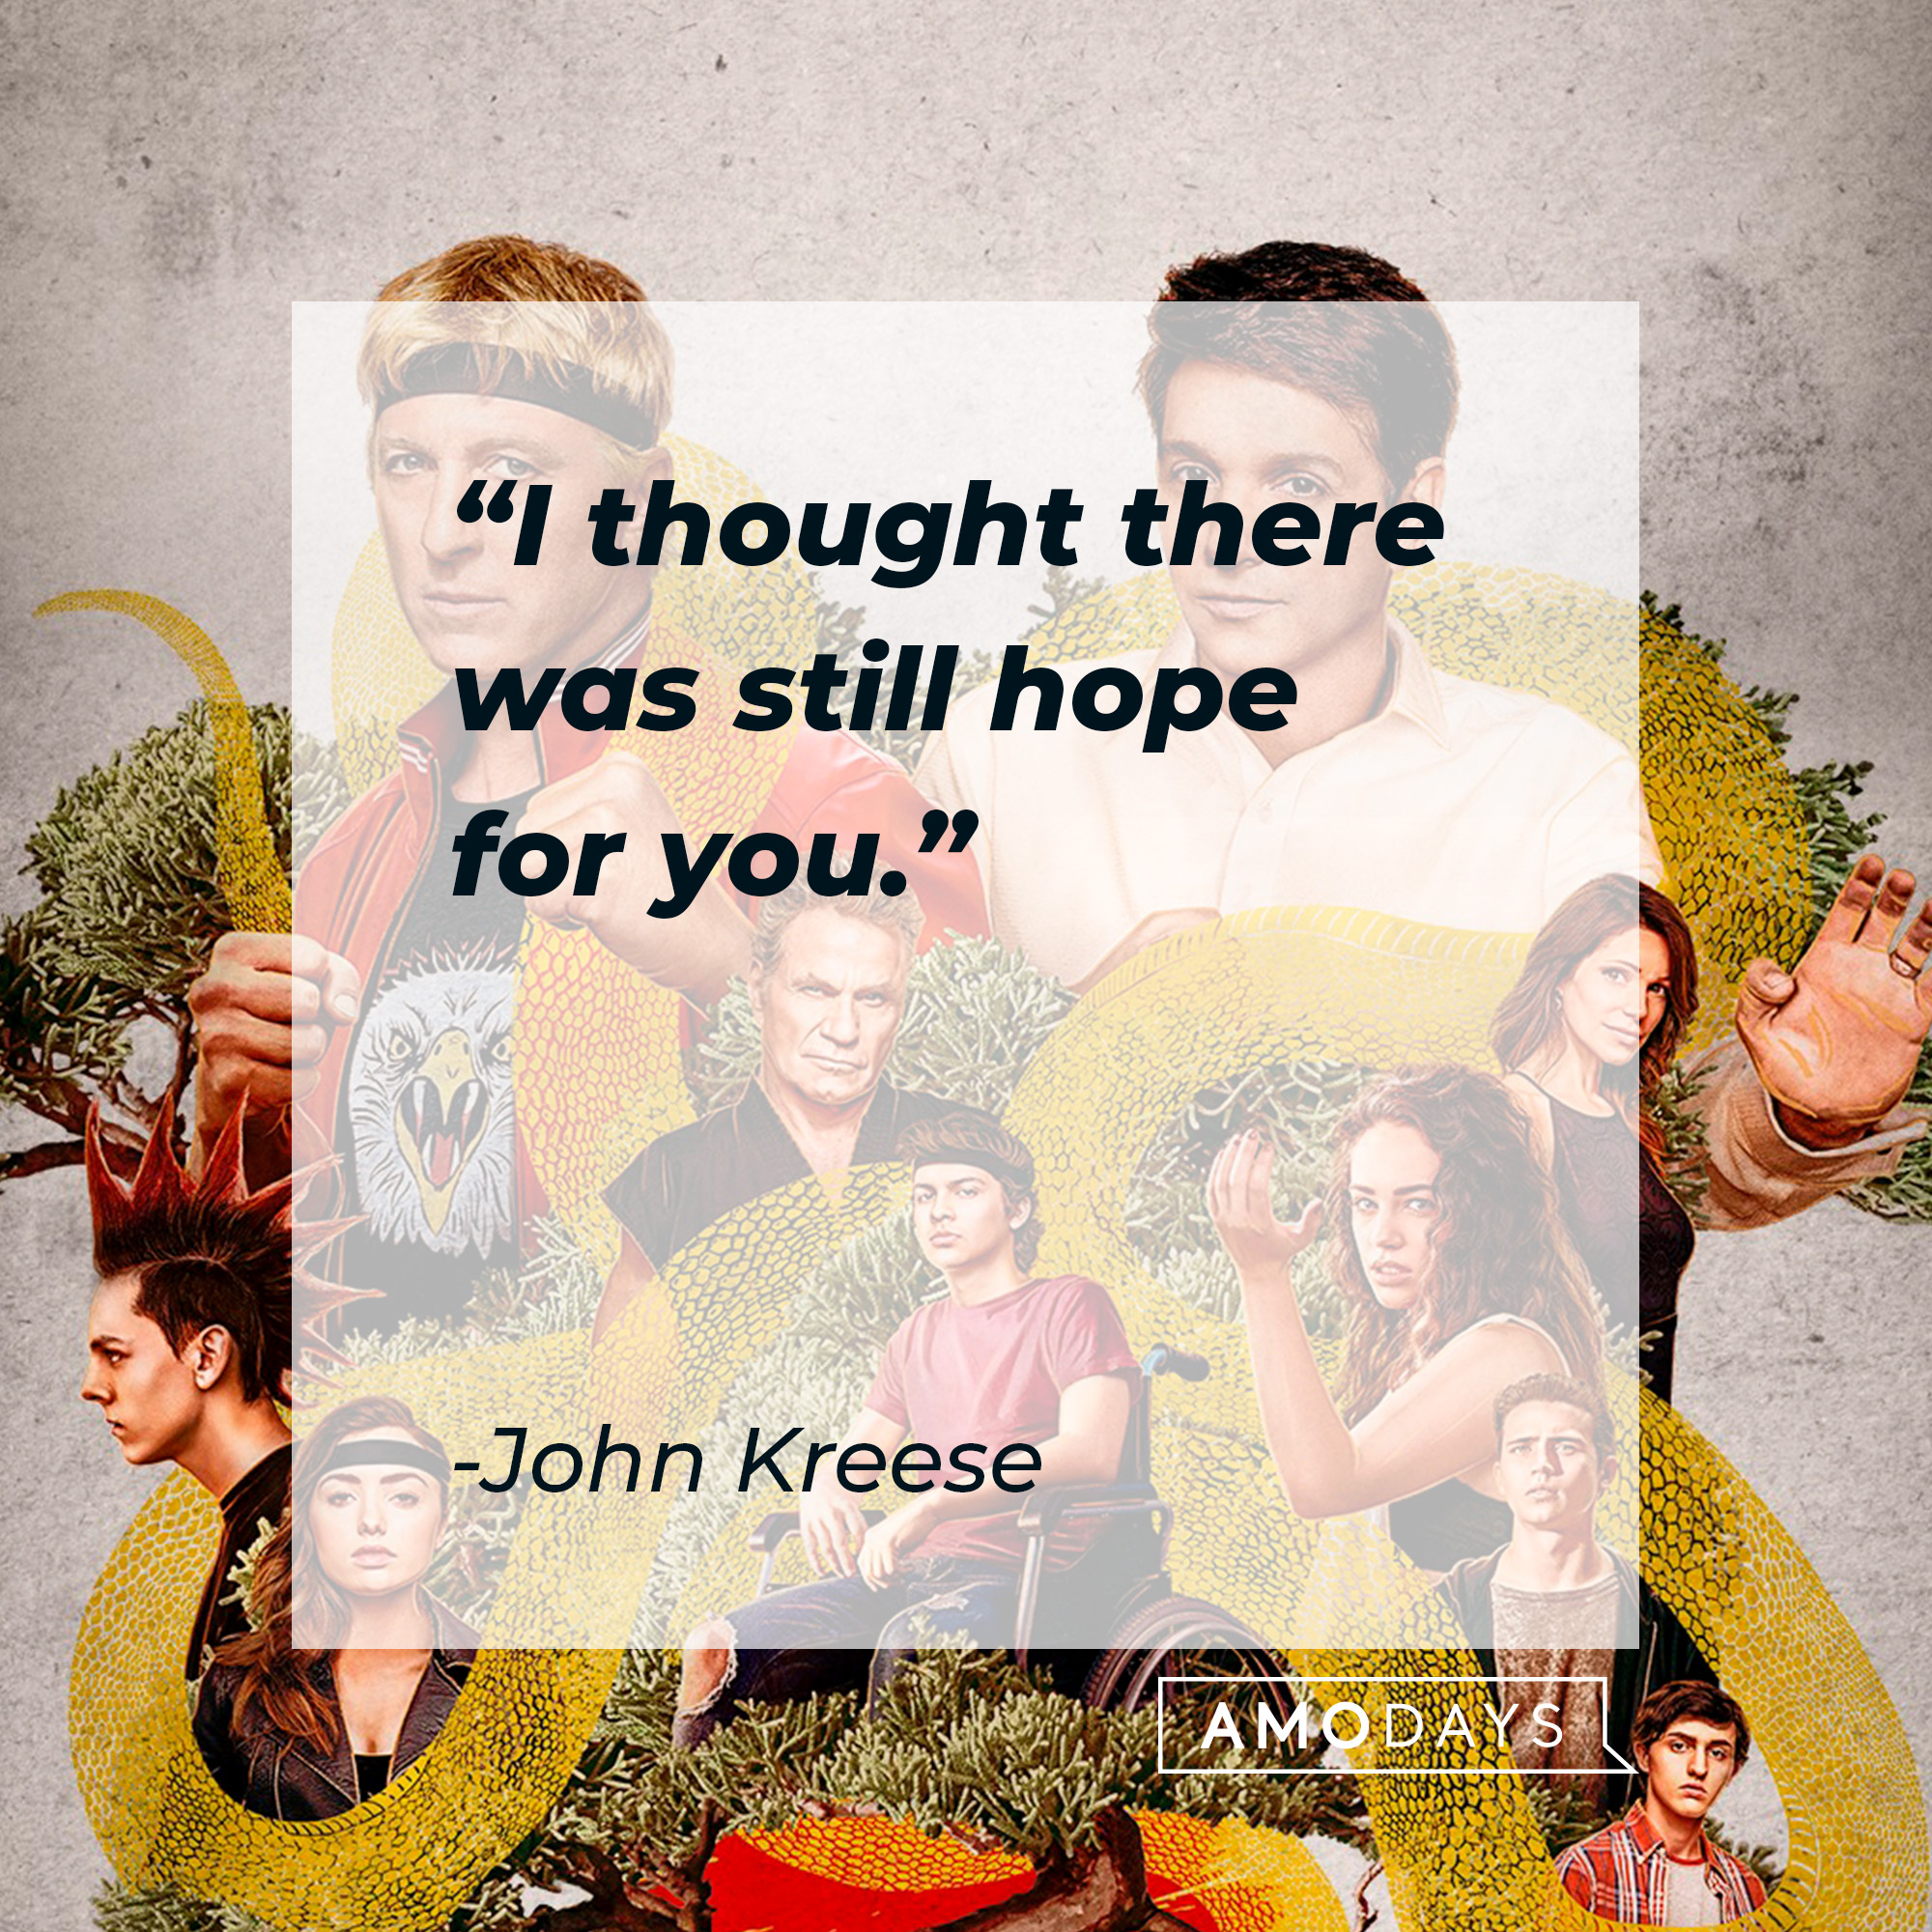 A  group of individuals from the, “Karate Kid” franchise, including John Kreese and his quote: “I thought there was still hope for you.” │Source: facebook.com/CobraKaiSeries